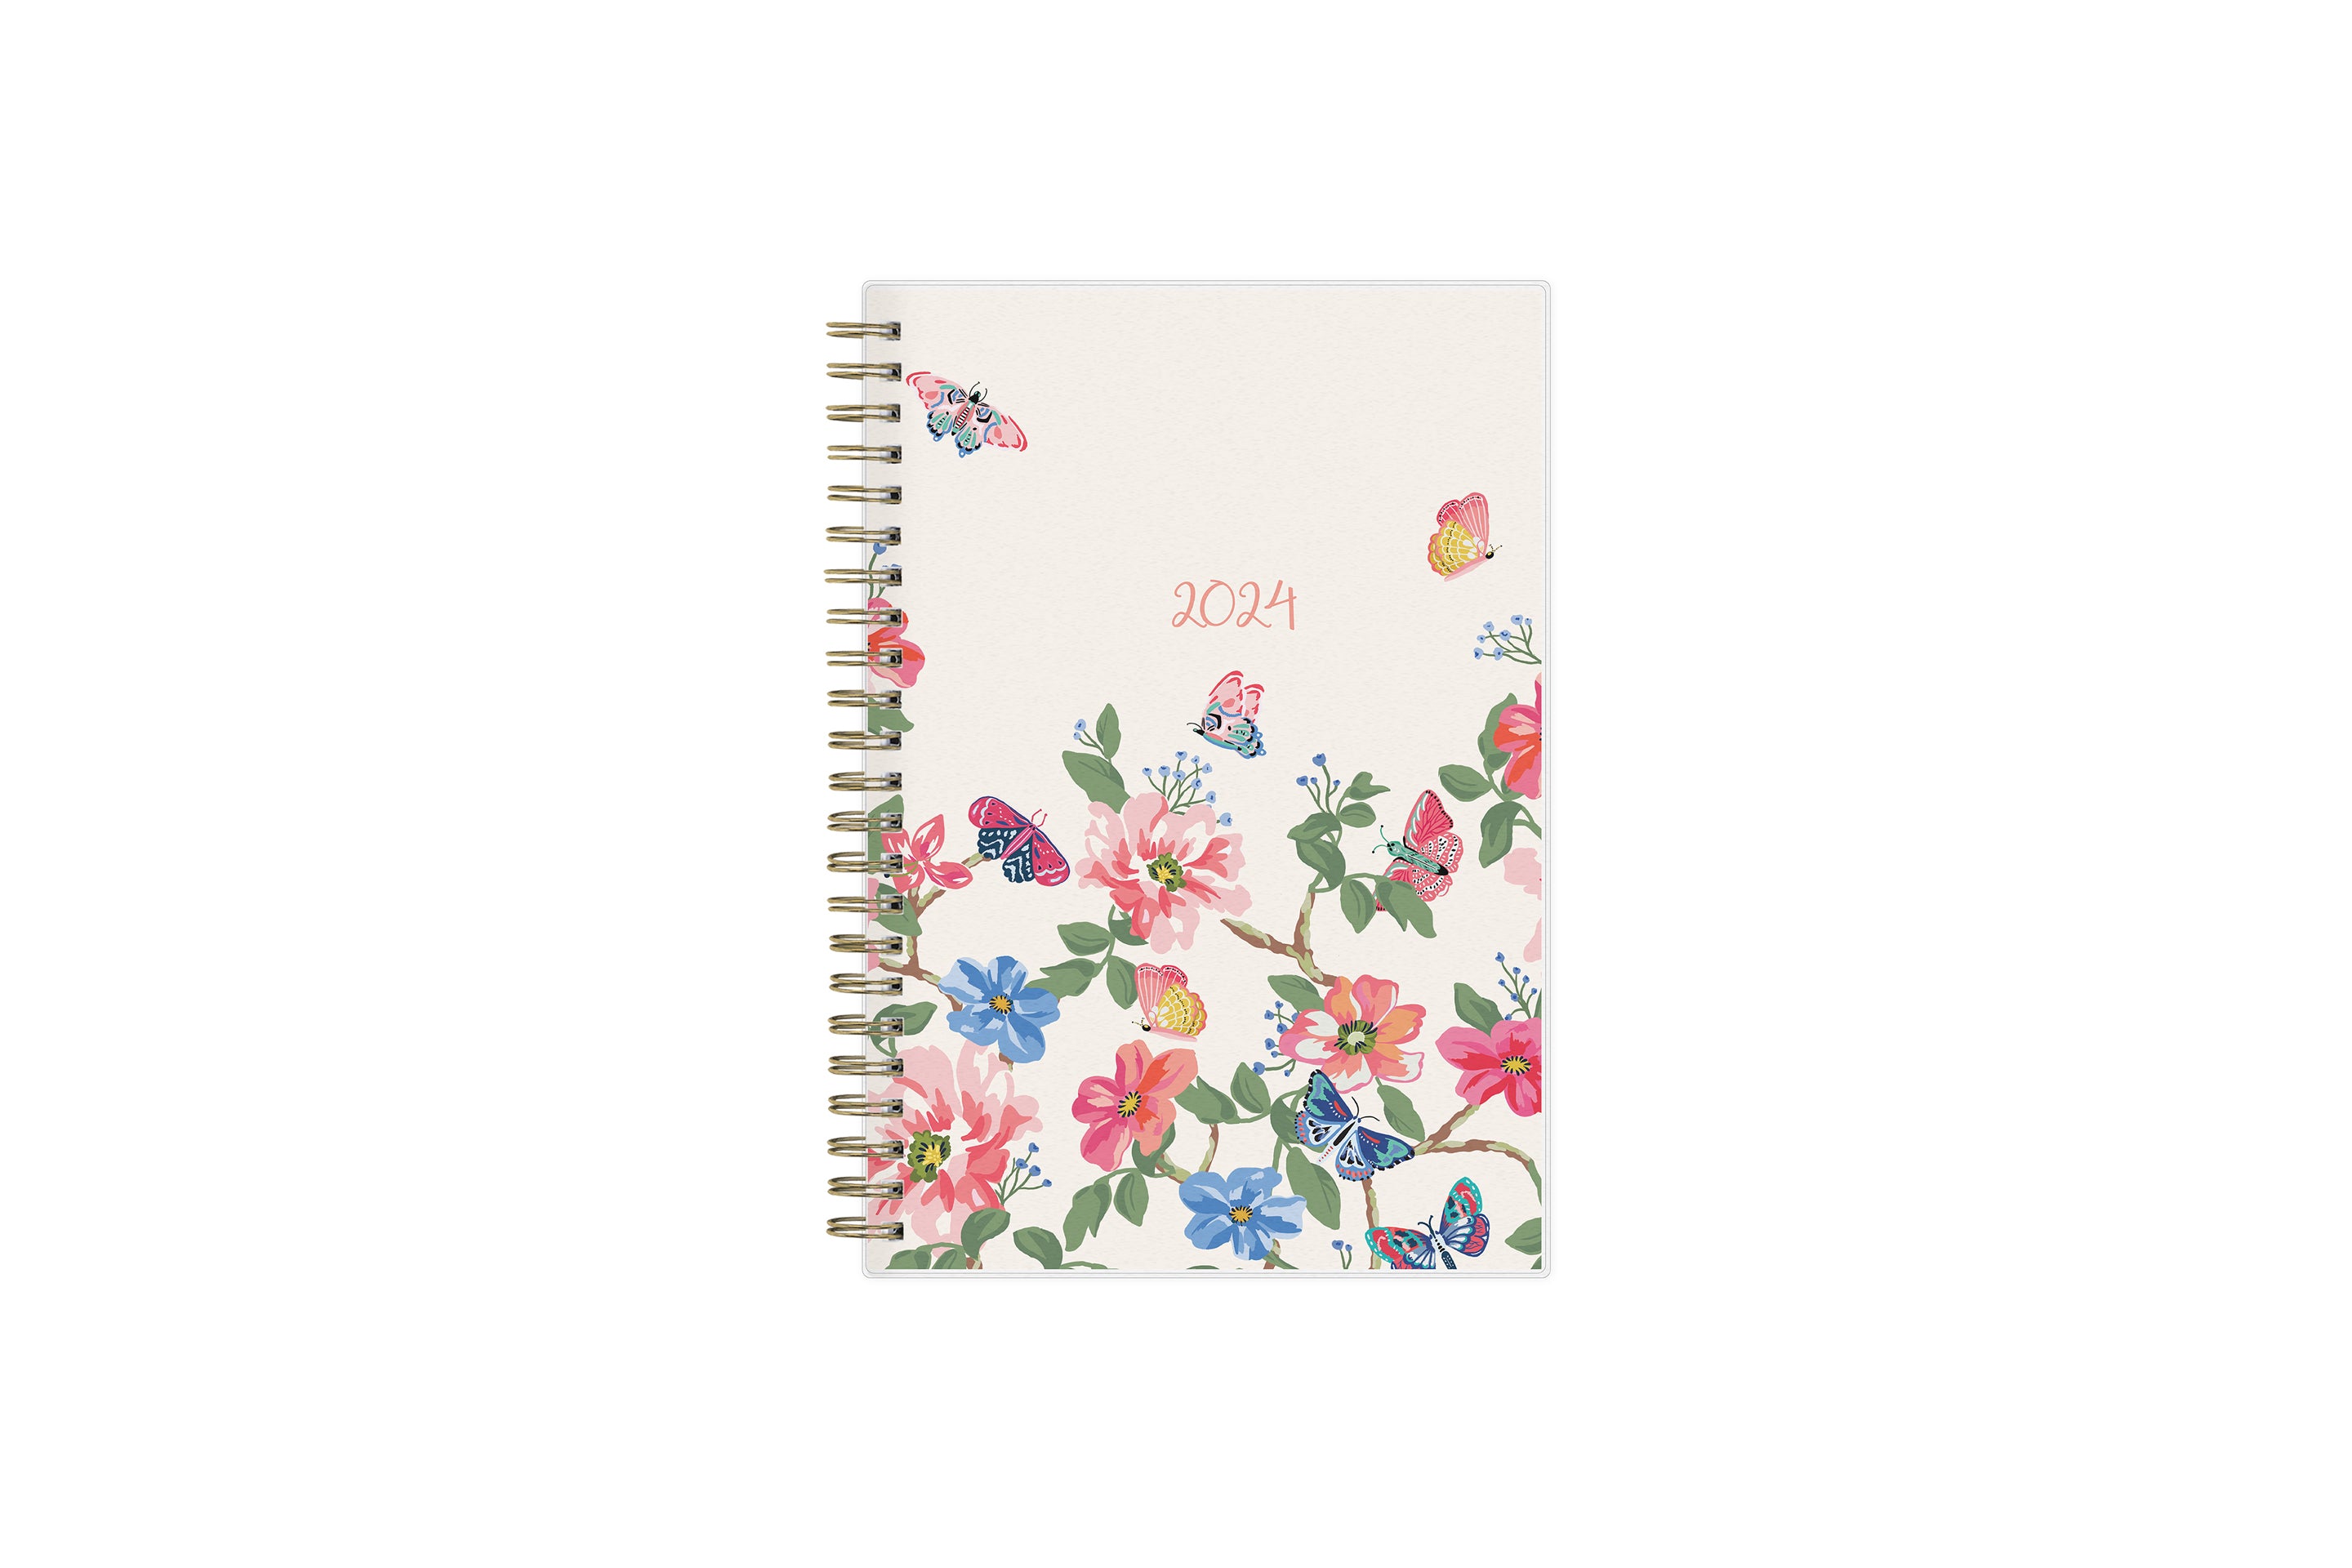 2024 blue sky floral cover and grey background weekly monthly planner in 5x8 planner size